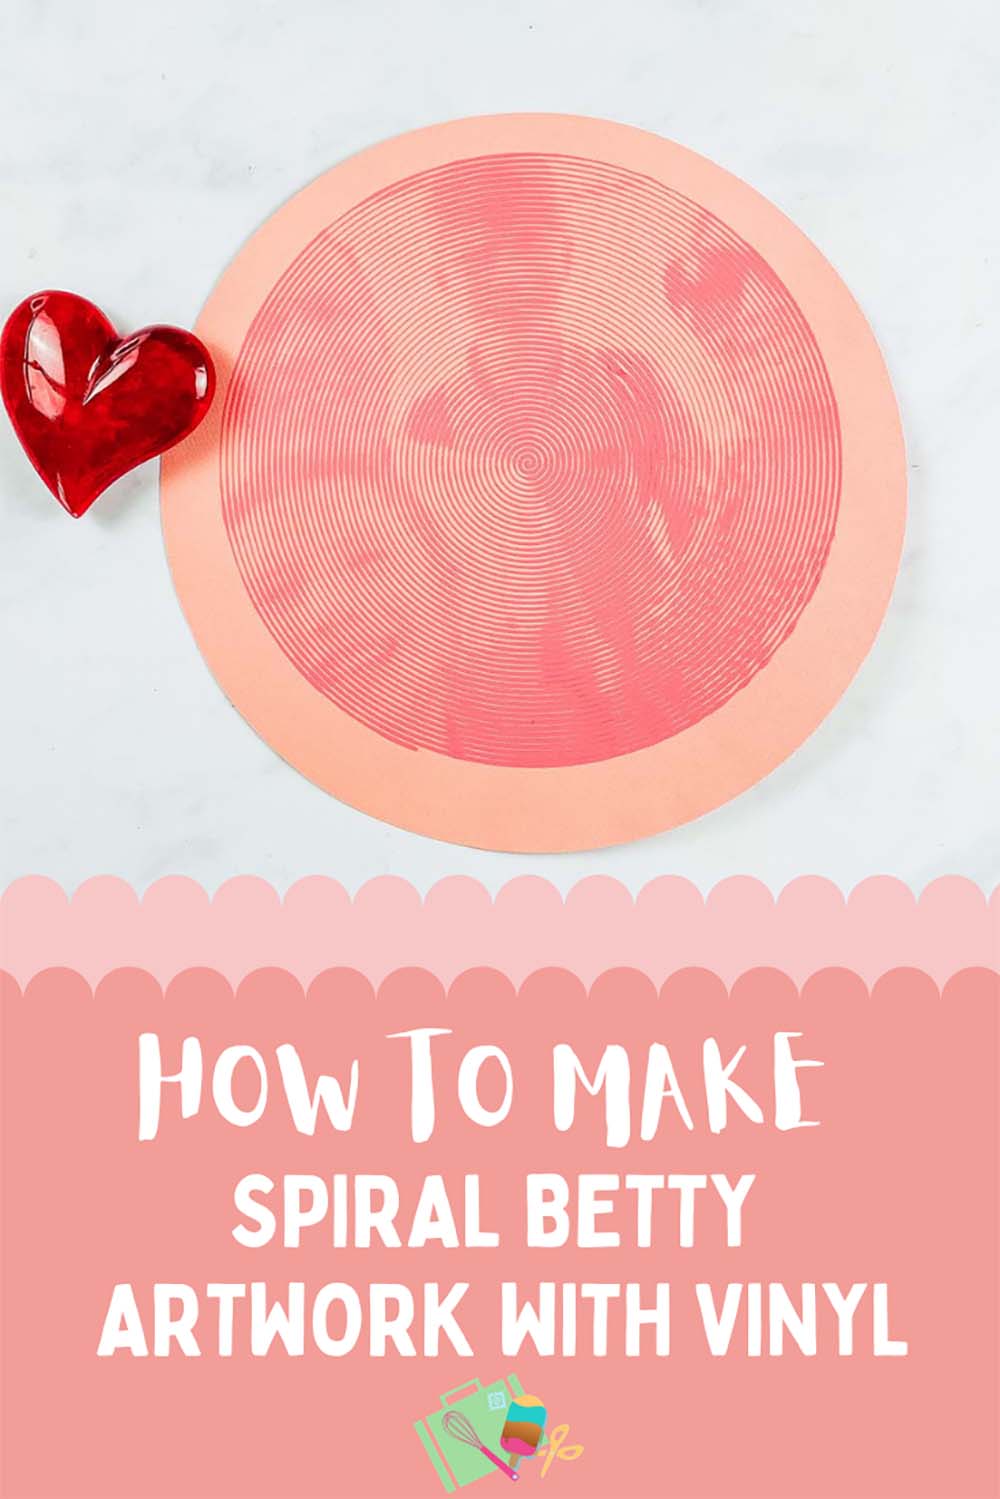 How to make spiral Betty artwork with vinyl